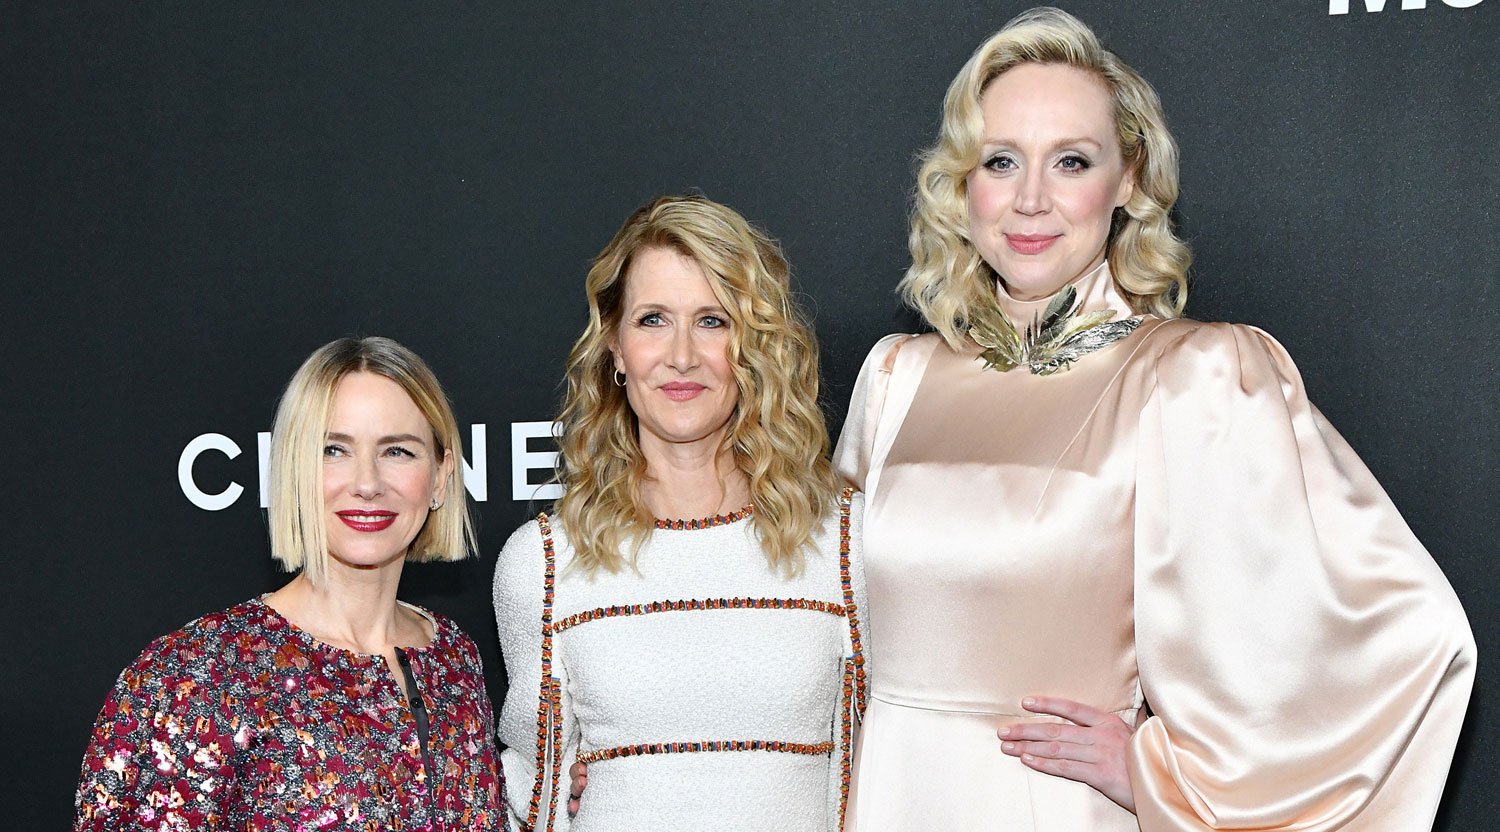 Laura Dern Is Honored by Friends Naomi Watts & Gwendoline Christie at MoMA Event